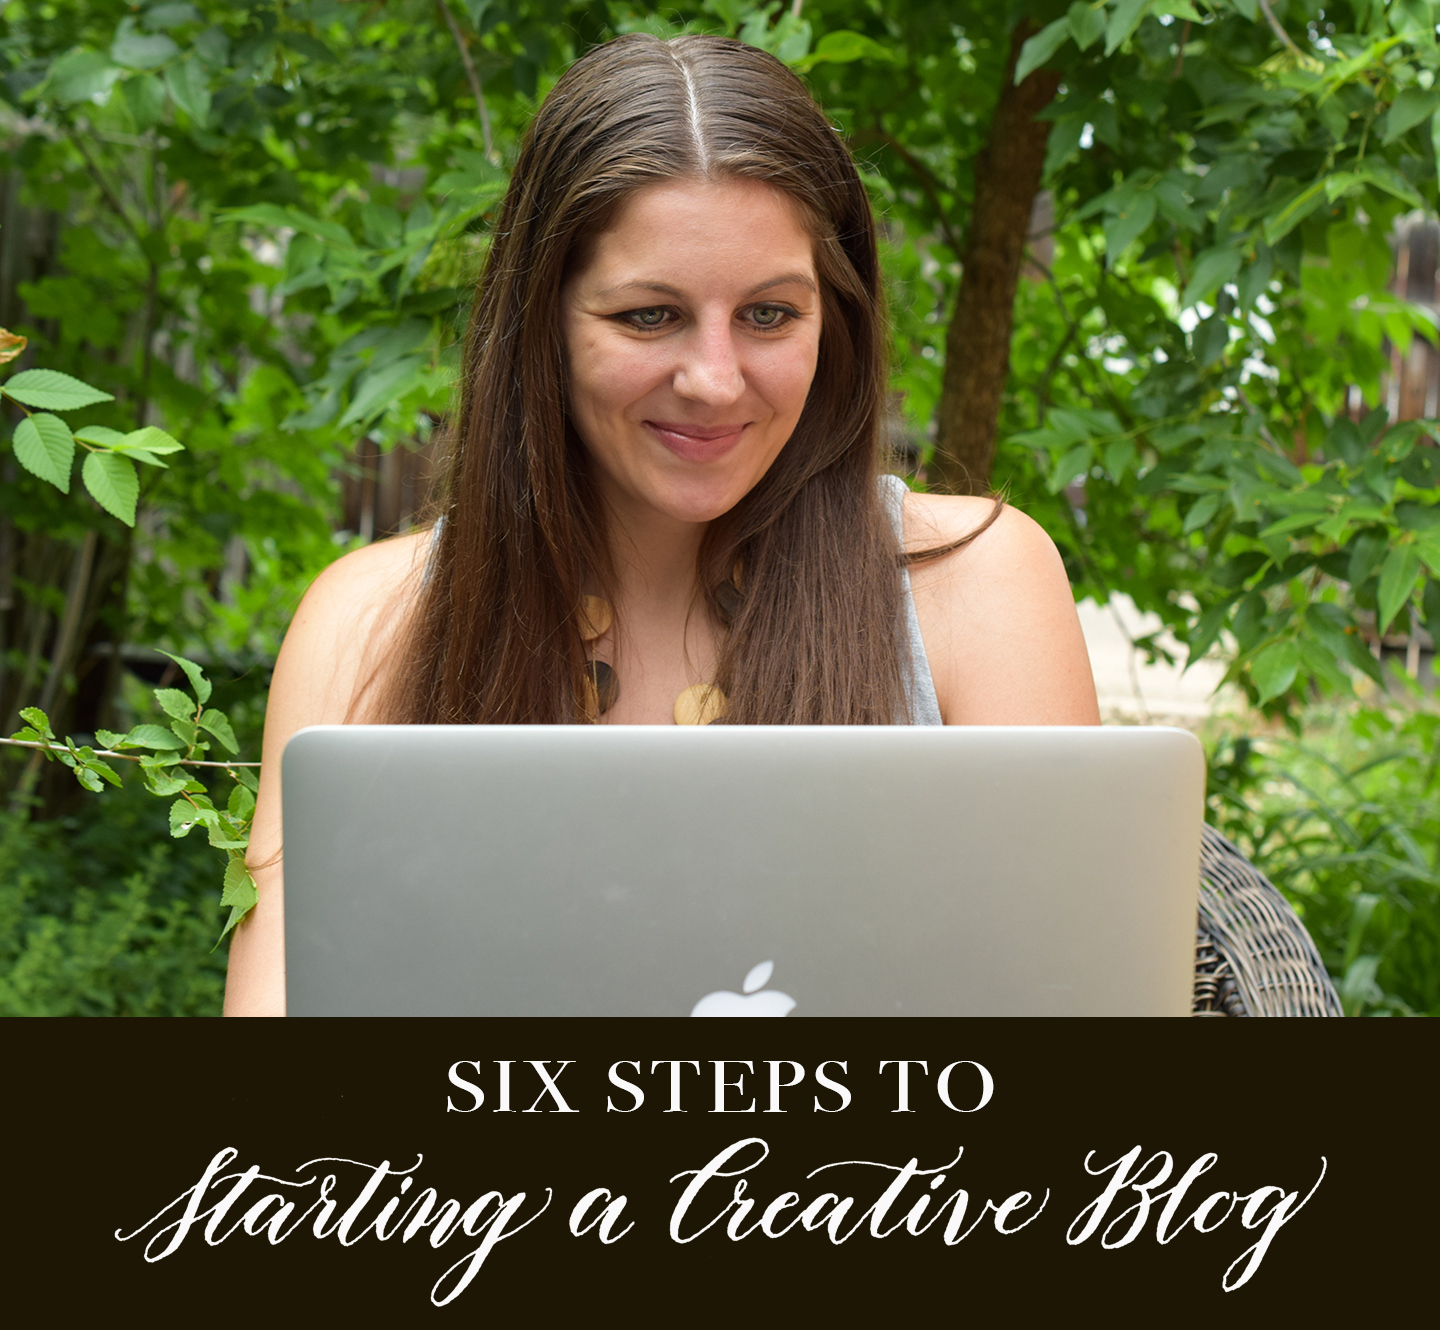 Six Steps to Starting a Creative Blog